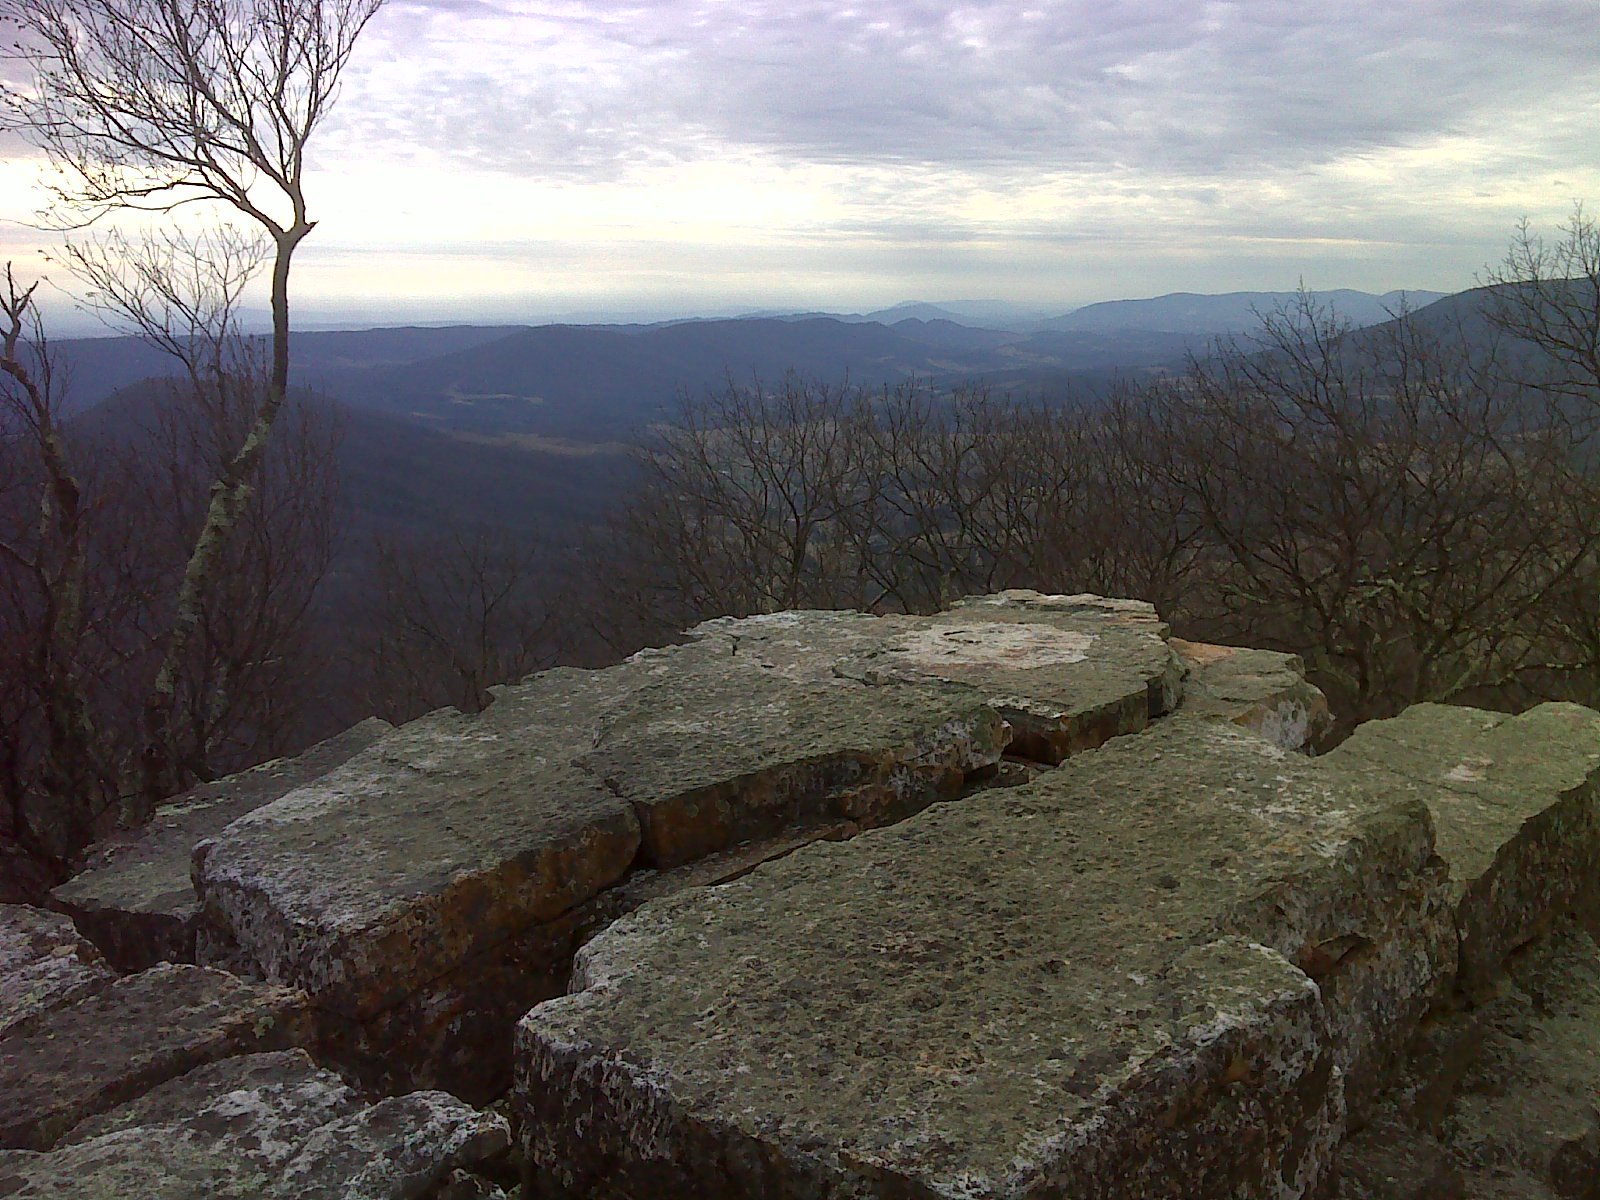 mm 3.6  View from White Rock on the side of Kelly Knob
Courtesy pjwetzel@gmail.com